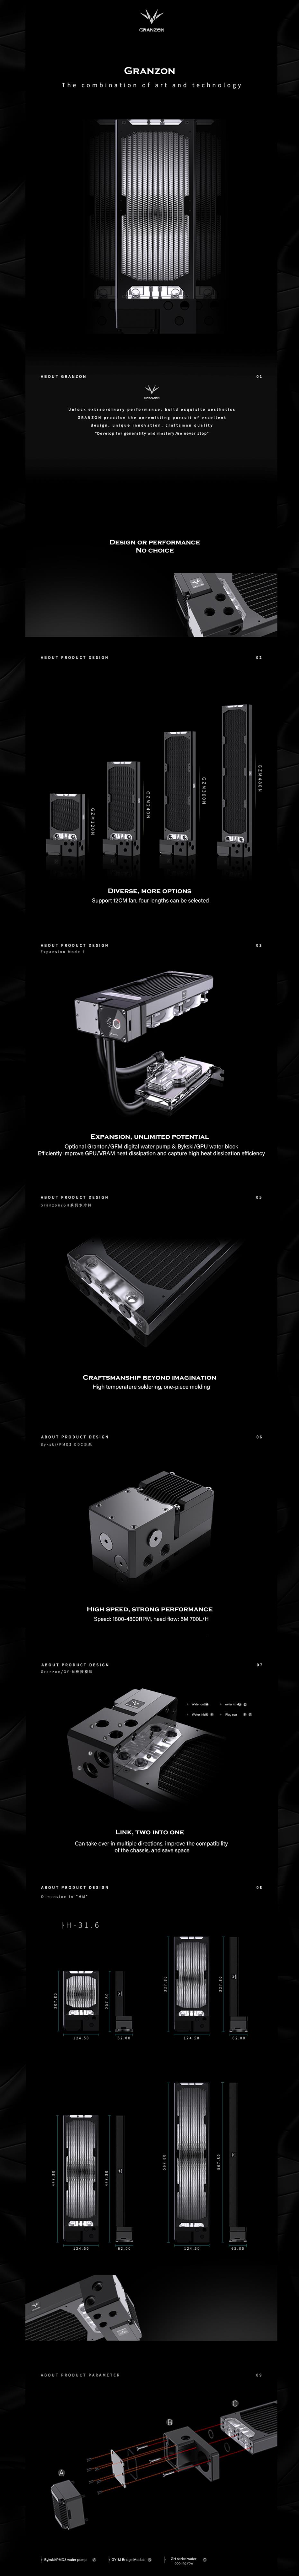 A large marketing image providing additional information about the product Bykski Granzon 240mm Pump Radiator Combo - Additional alt info not provided